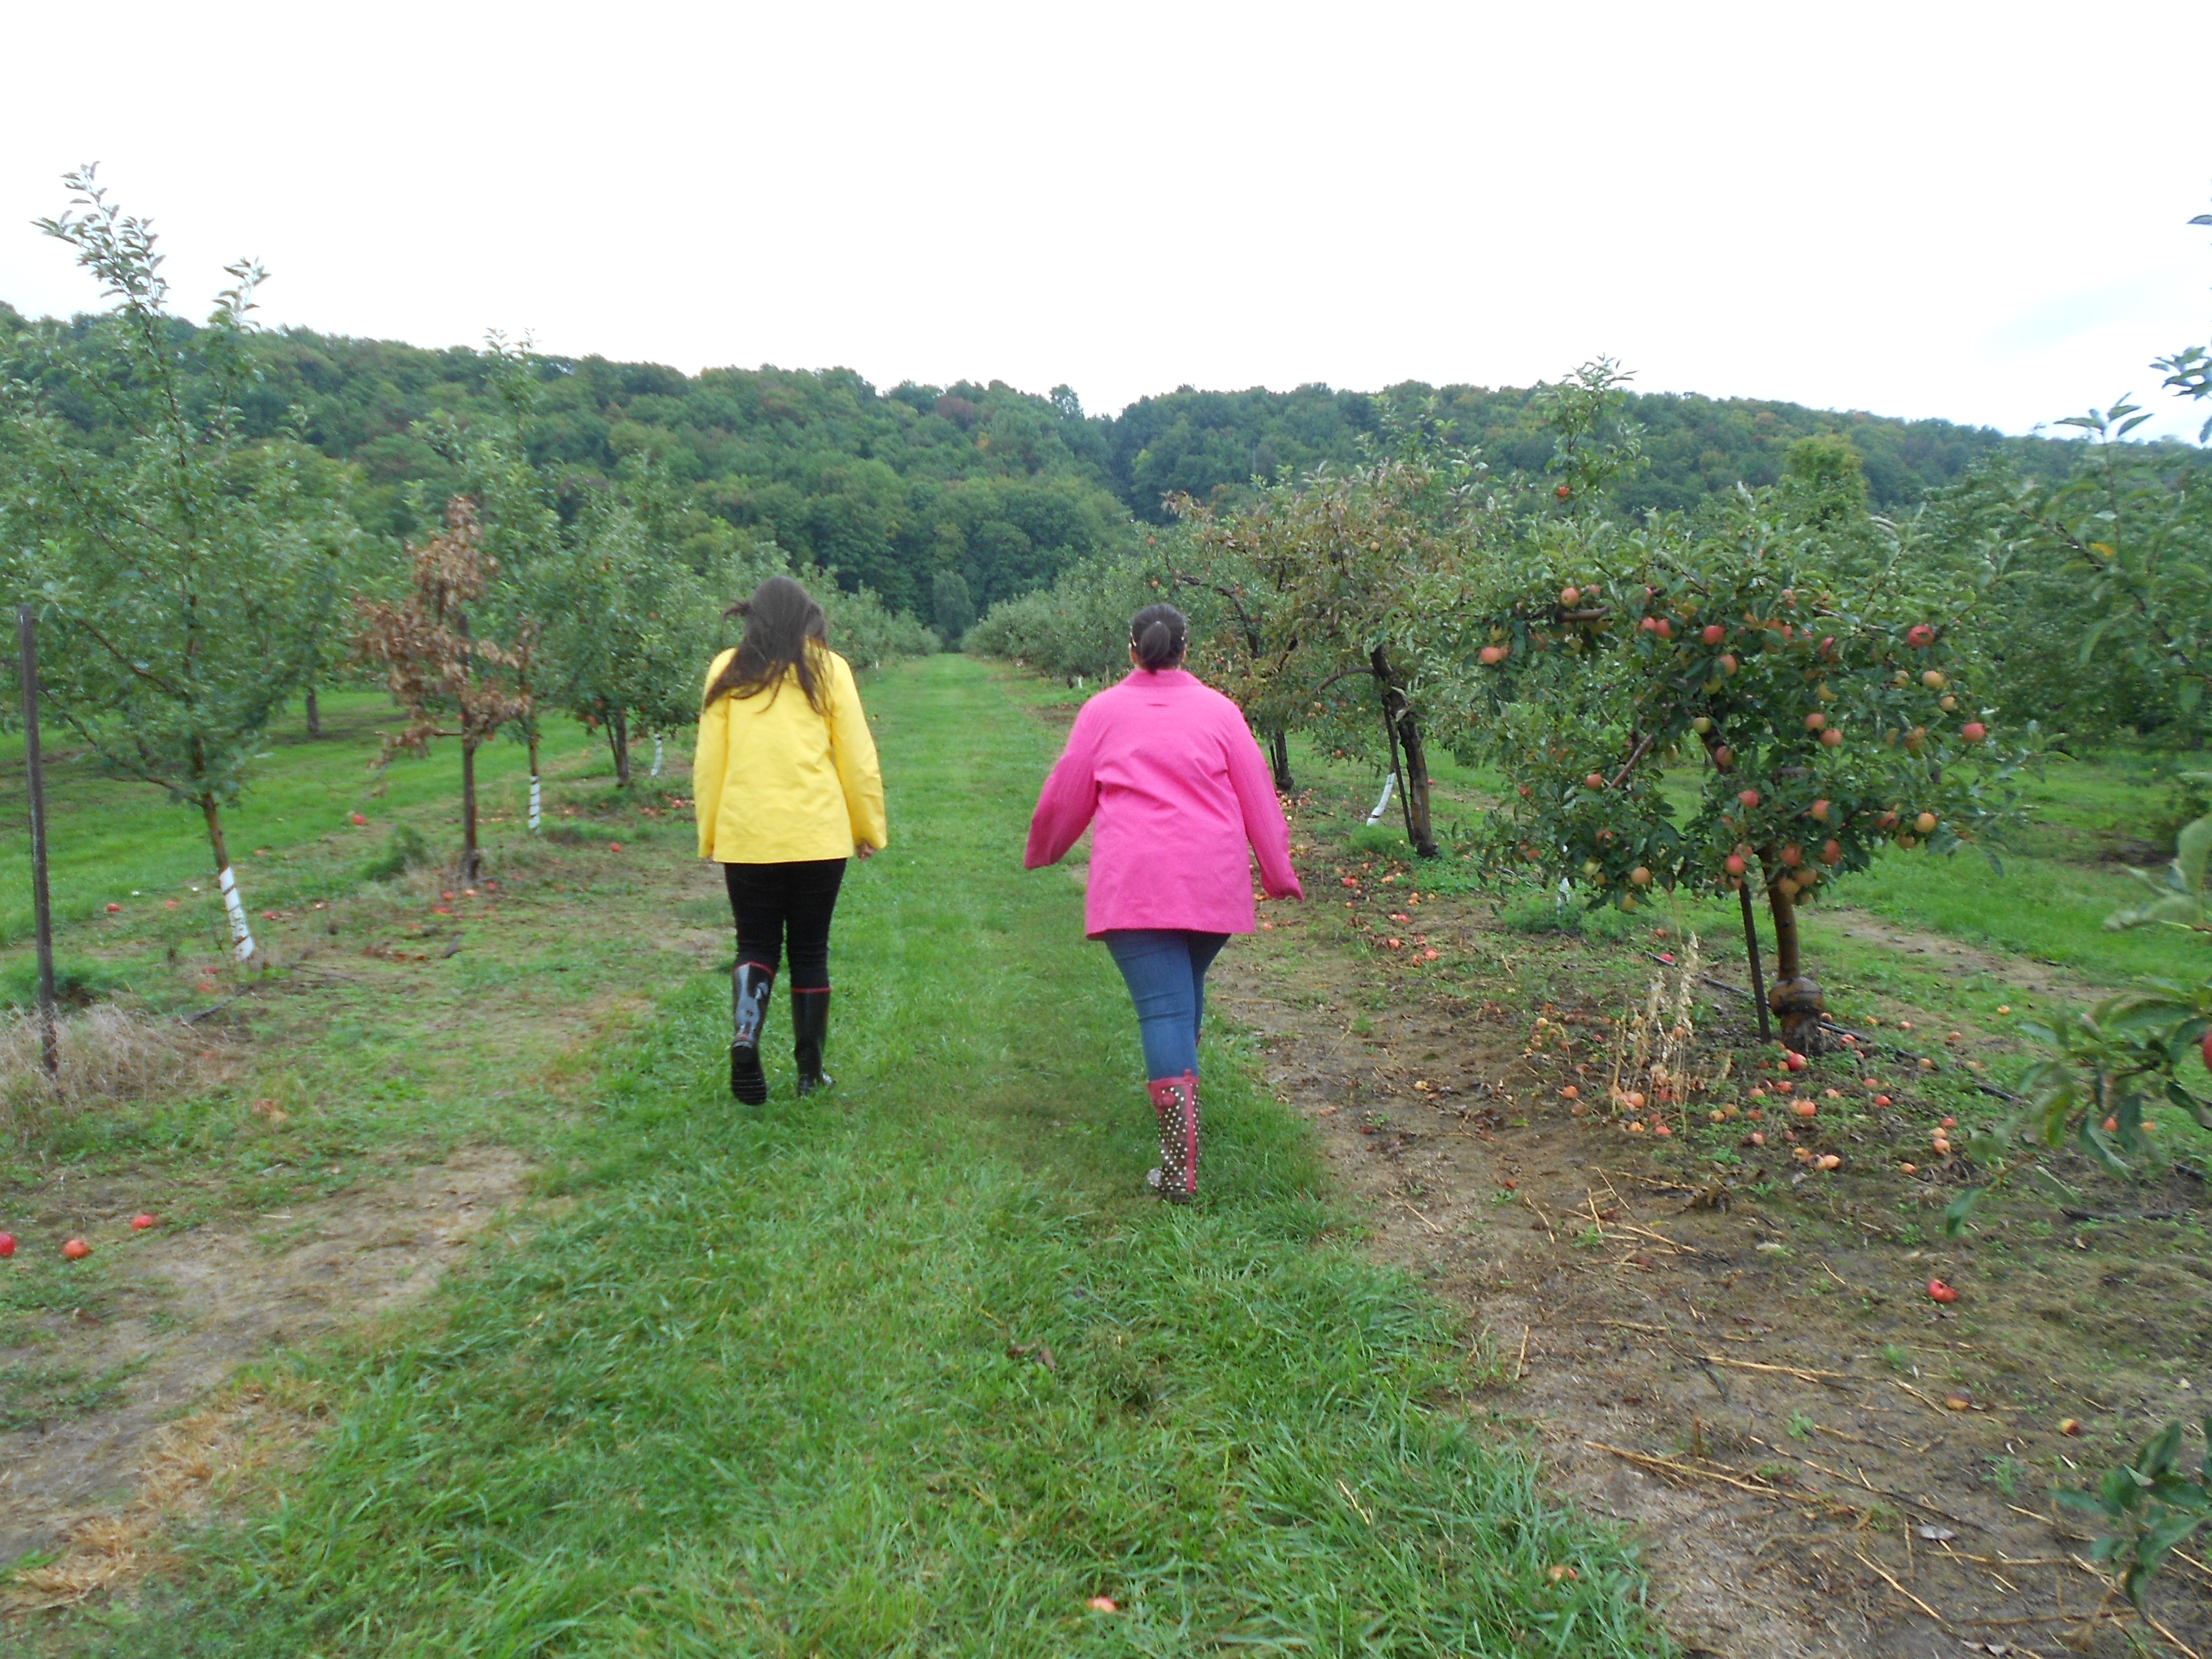 2 girls, on in a bright yellow raincoat and one in a bright pink raincoat, walking away from the camera in an apple orchard.